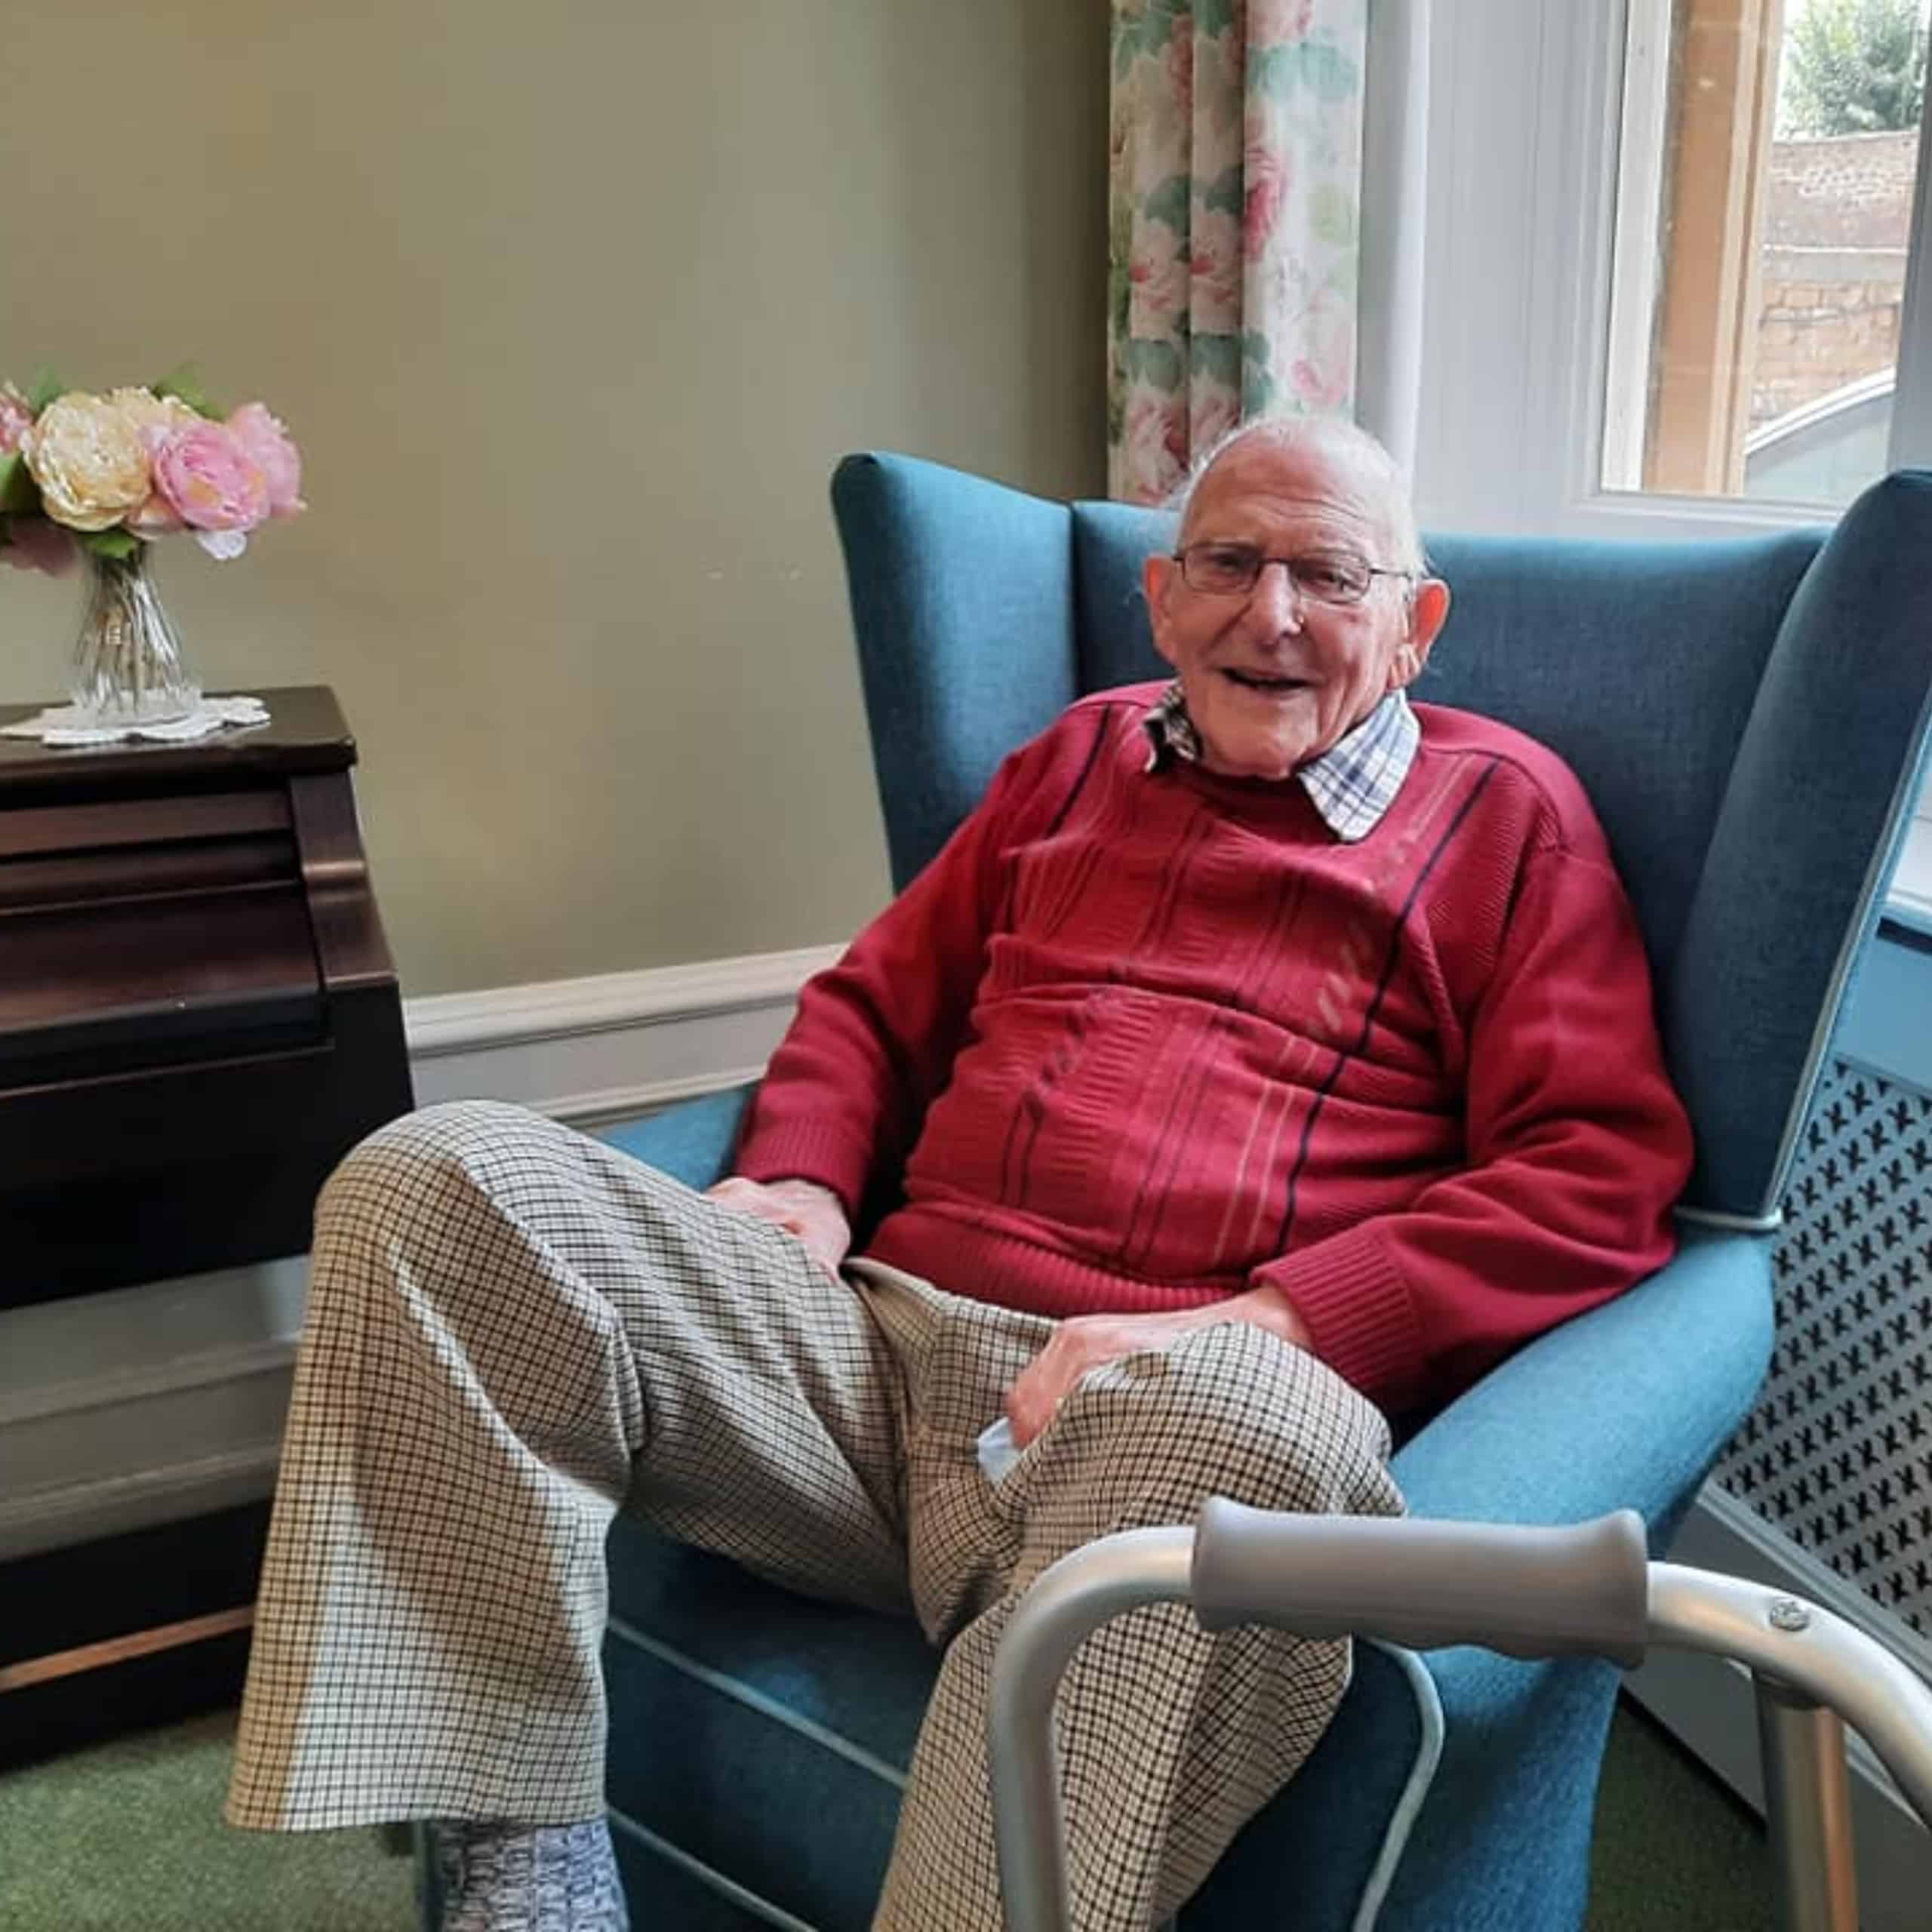 Geoffrey Hillman, resident of Featherton House Care Home in Deddington, has been sharing the story of his time in India.